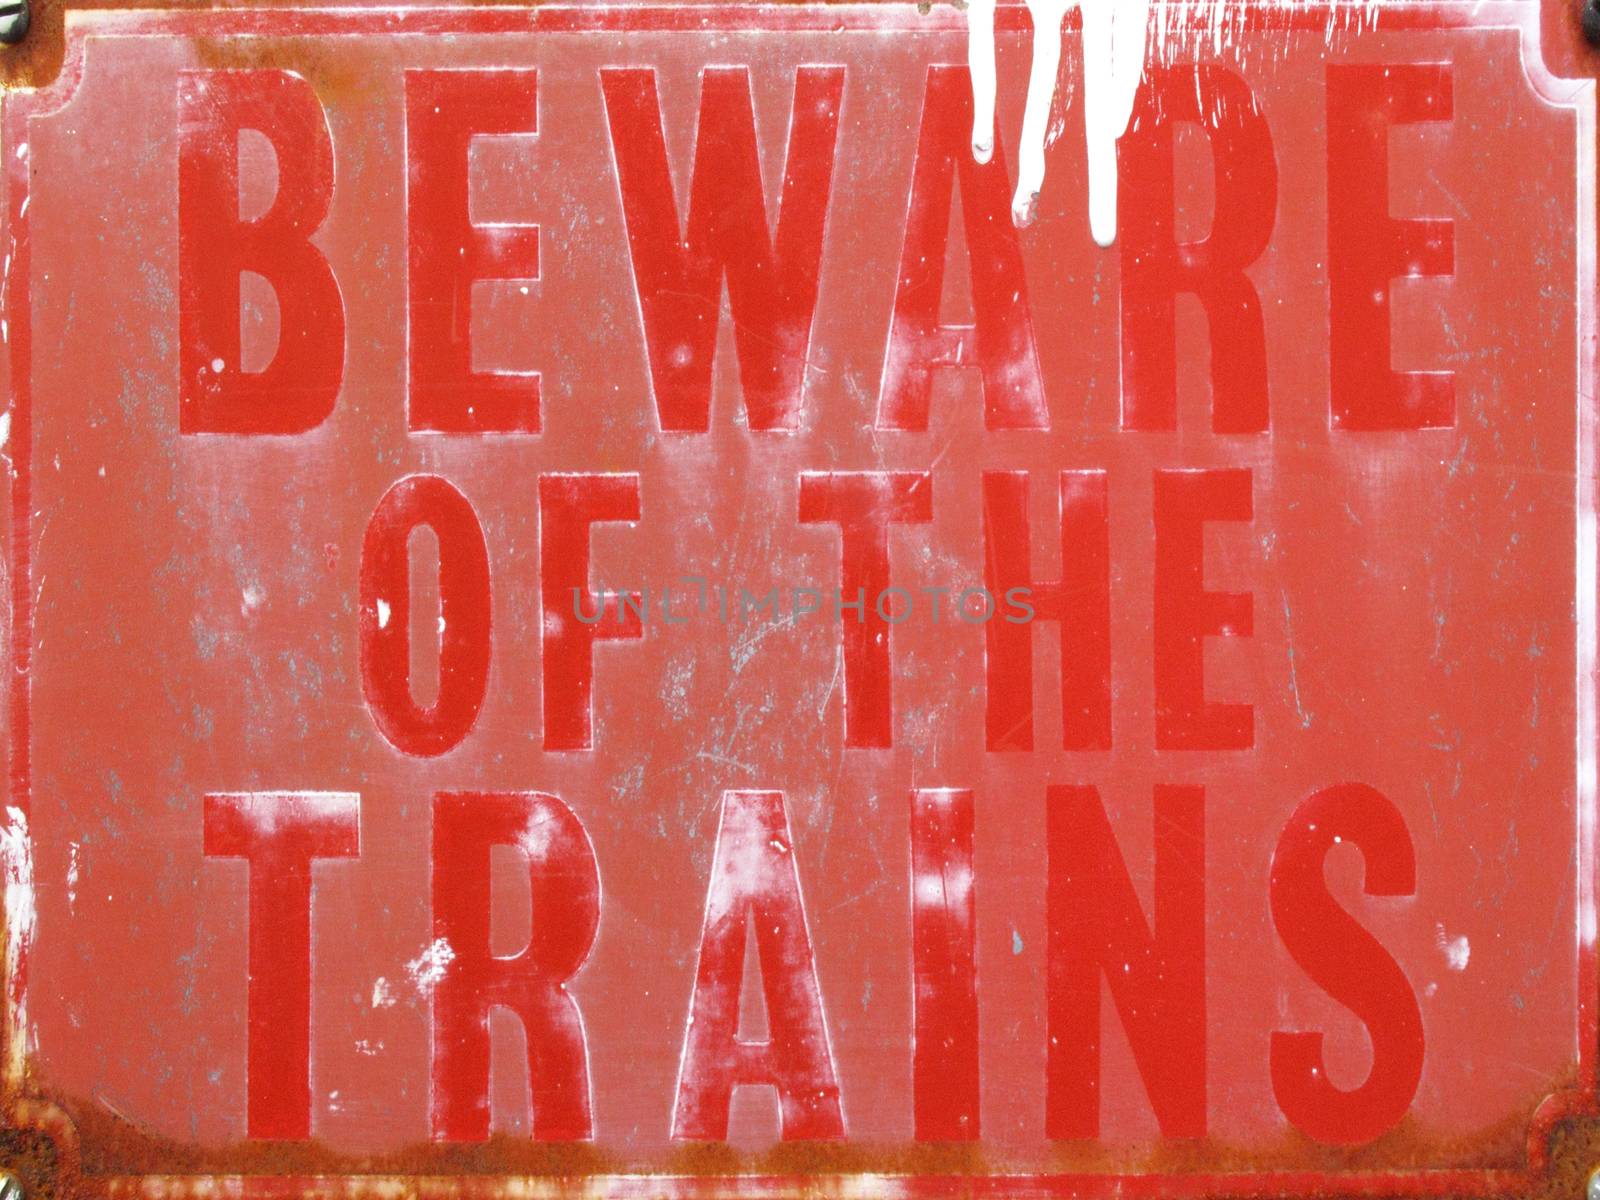 Old vintage red retro distressed railway enamel metal train sign with text beware of the trains stock photo